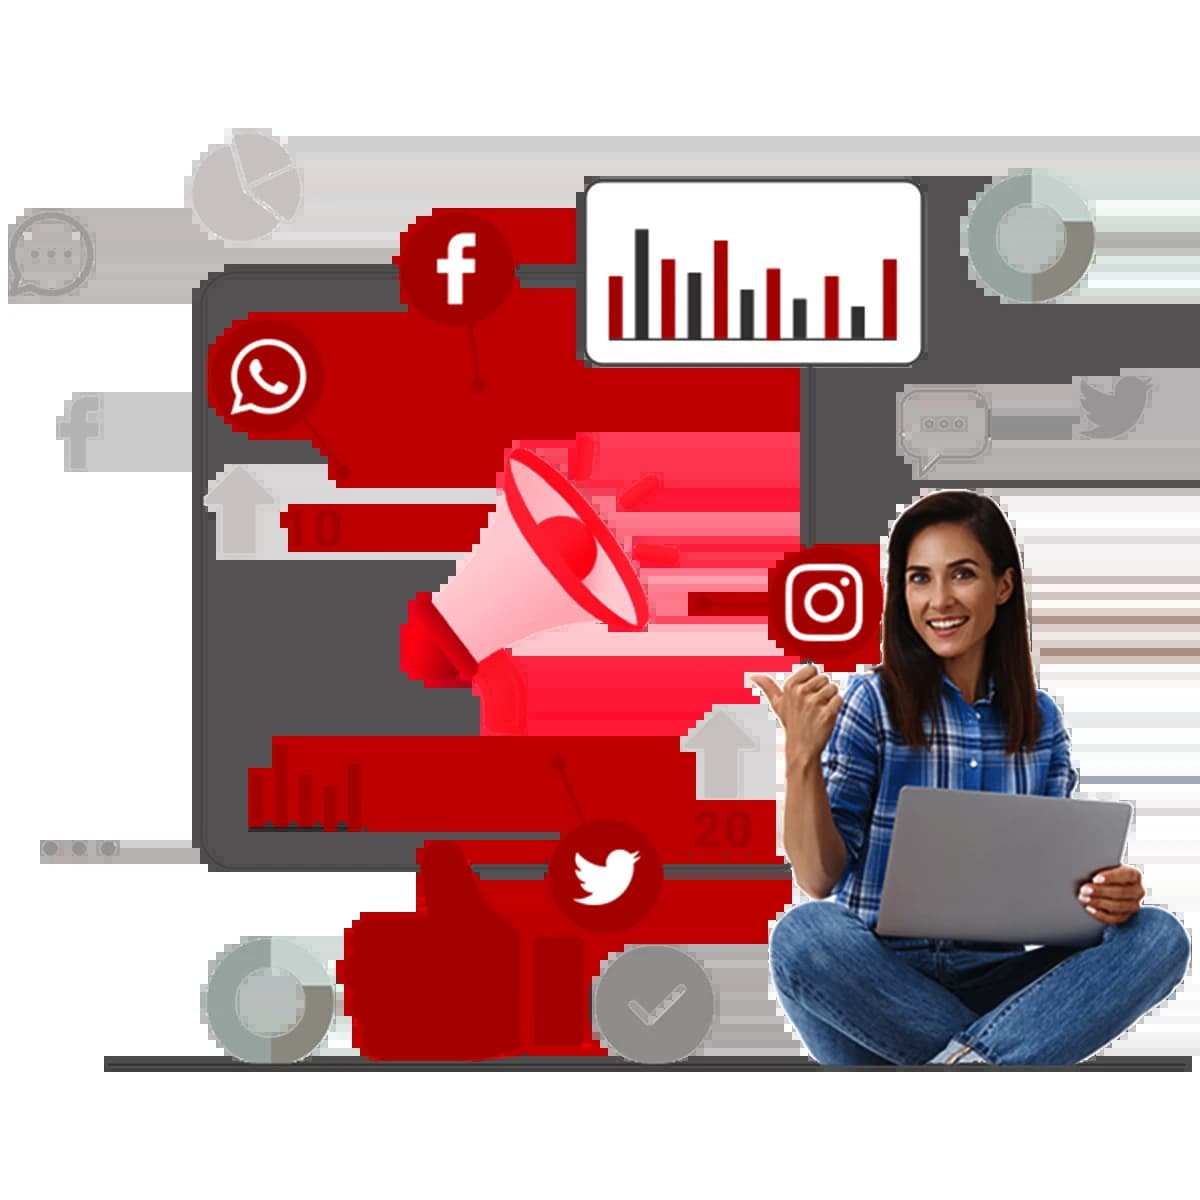 Social Media Optimization (SMO) - Process of optimizing website and content for social media networks to increase visibility, drive traffic, and increase brand reach.